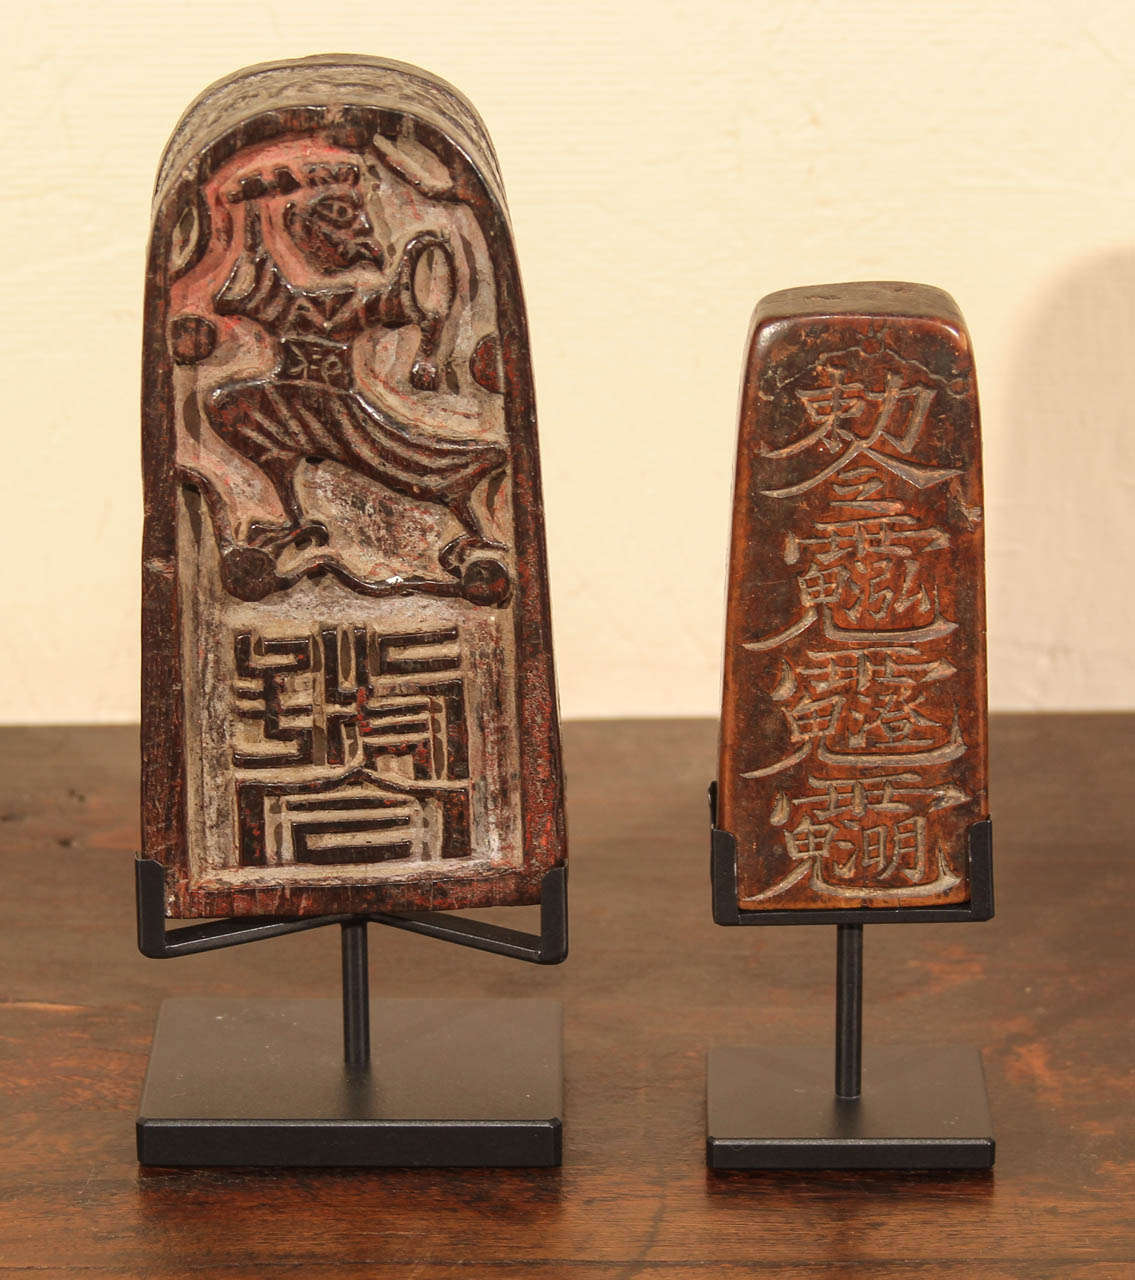 Chinese Taoist tablet used by davisti shaman in ceremonies of prayer. Chinese Hilltribe minority hand carved wood with calligraphic prayer inscription. circa 1900.
A. on left: on stand: 8